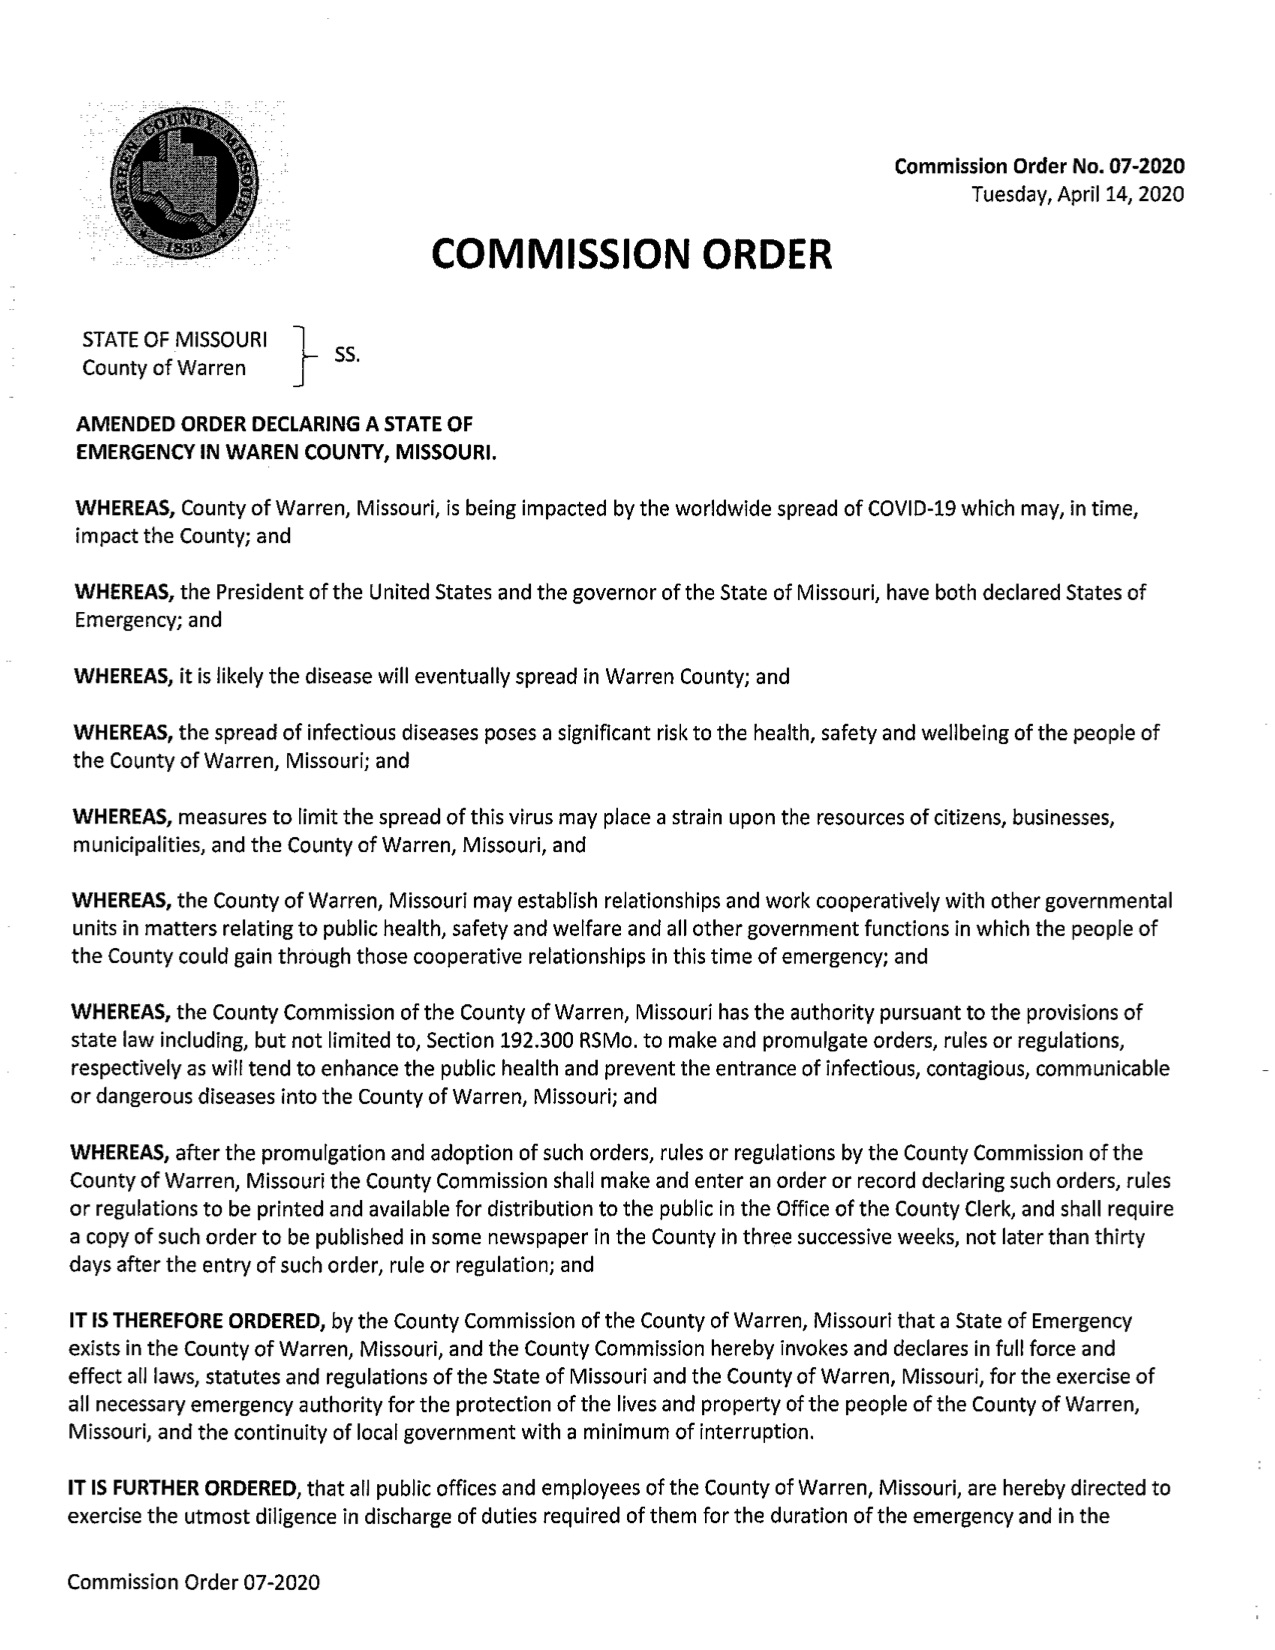 Amended Order Declaring a State of Emergency in Warren County, Missouri